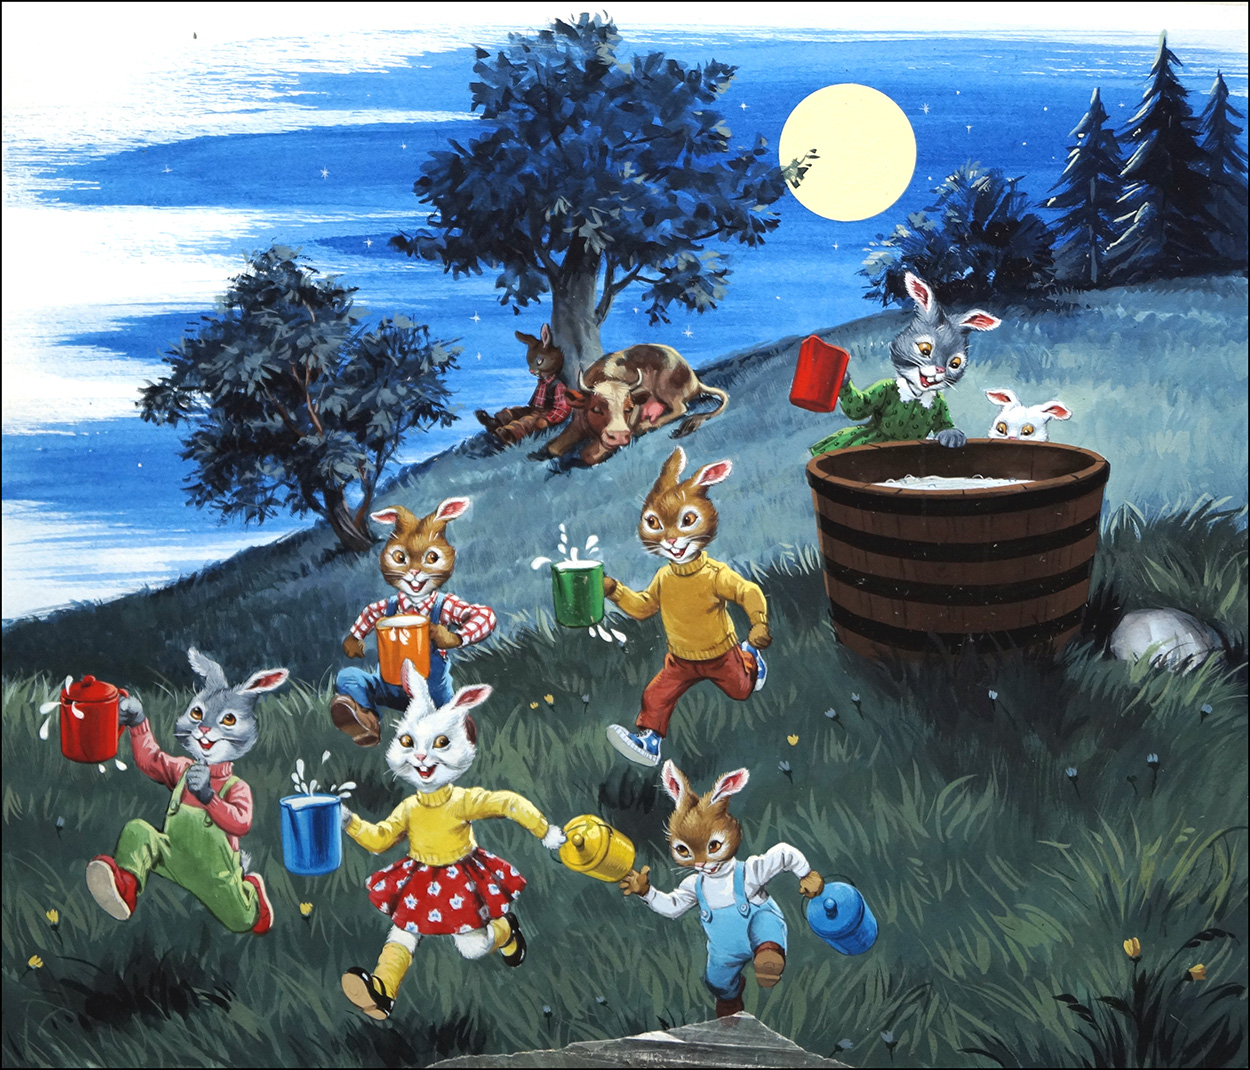 Brer Rabbit and the Milk Cow Blues (Original) art by Virginio Livraghi Art at The Illustration Art Gallery